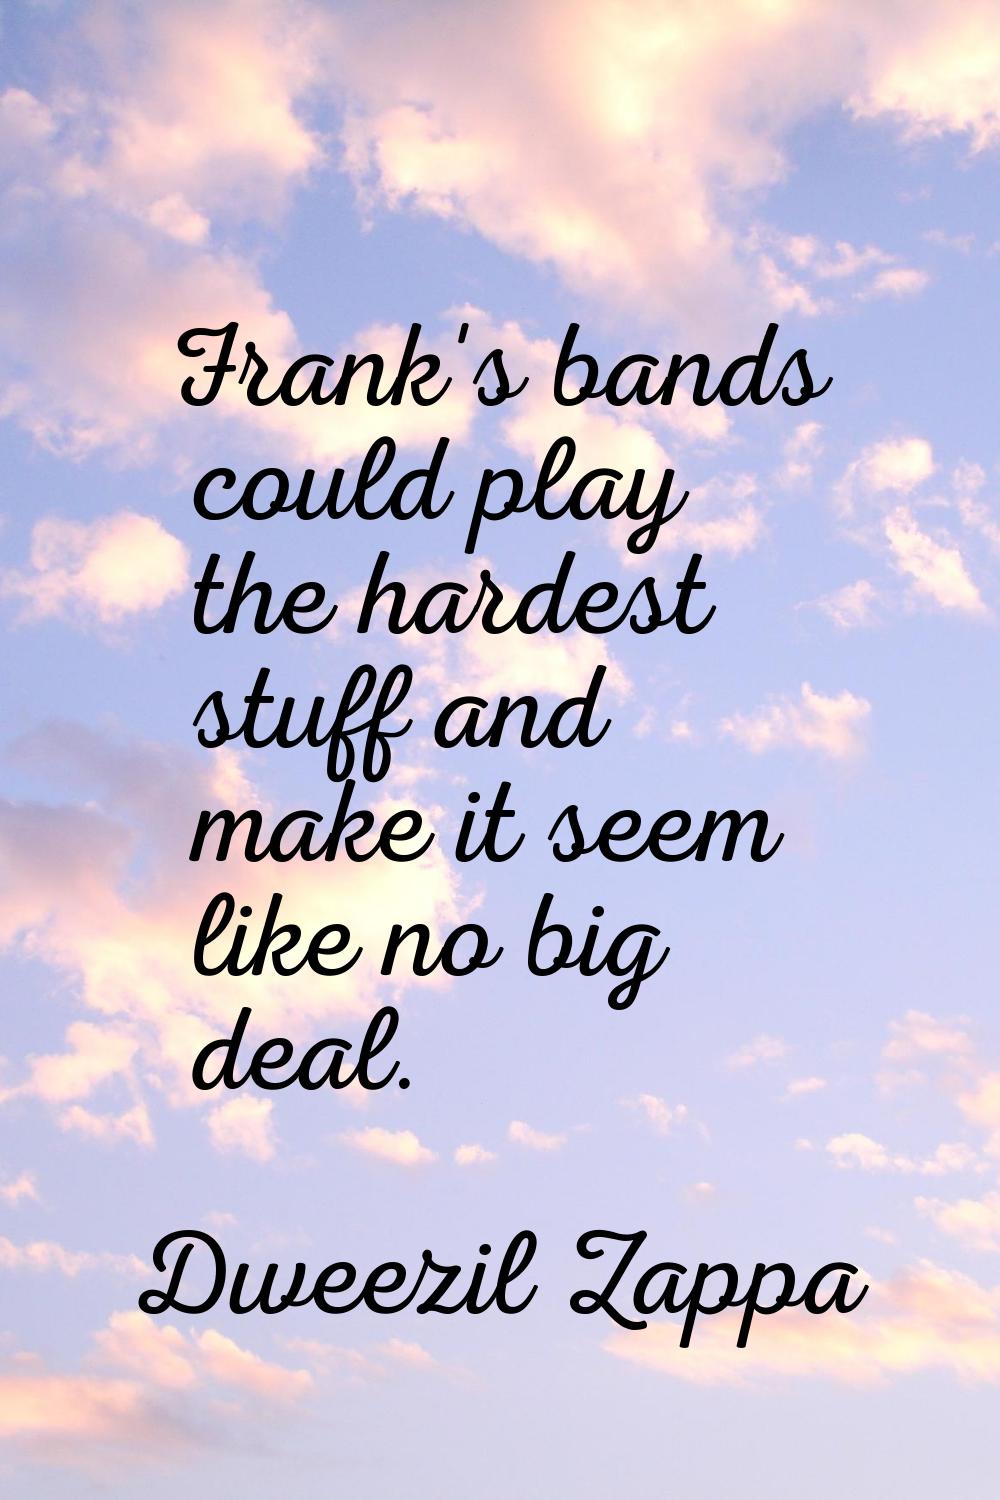 Frank's bands could play the hardest stuff and make it seem like no big deal.